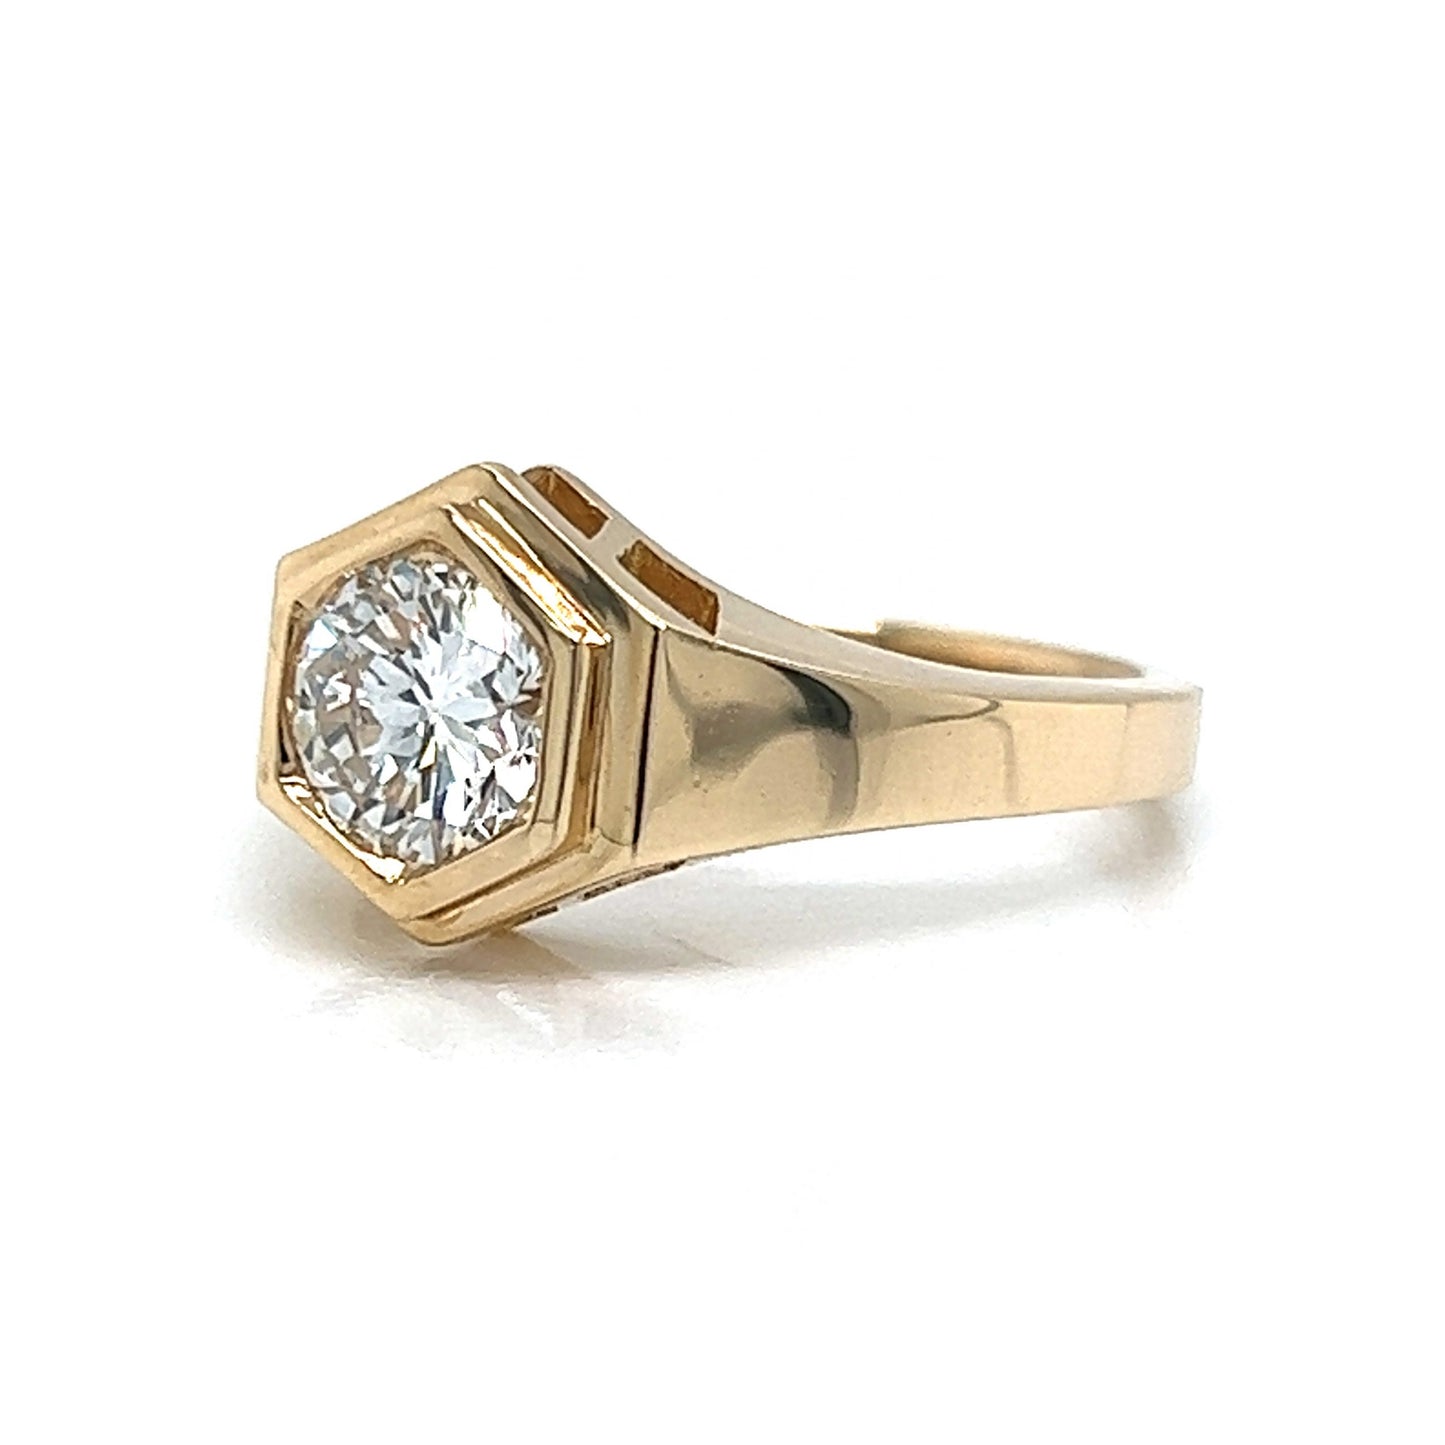 Hexagon Shaped .84 Round Diamond Engagement Ring in 14k Gold